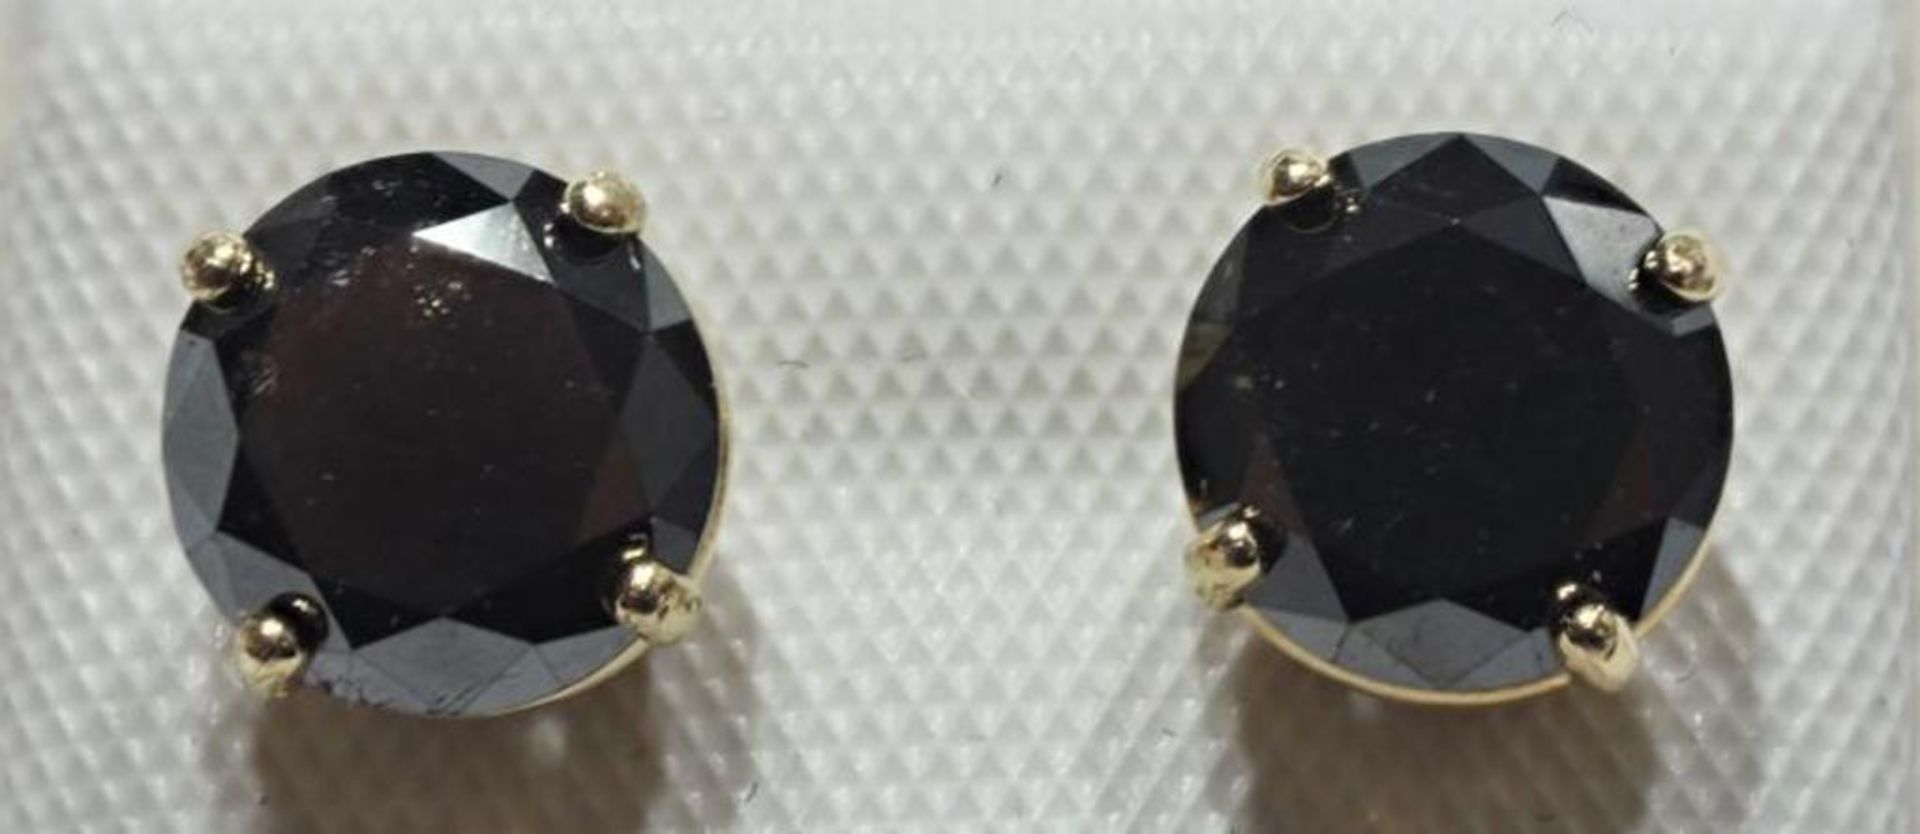 14K Yellow Gold Large Black Diamond (2.65ct) Stud Earrings (Made in Canada). Insurance Value $1600